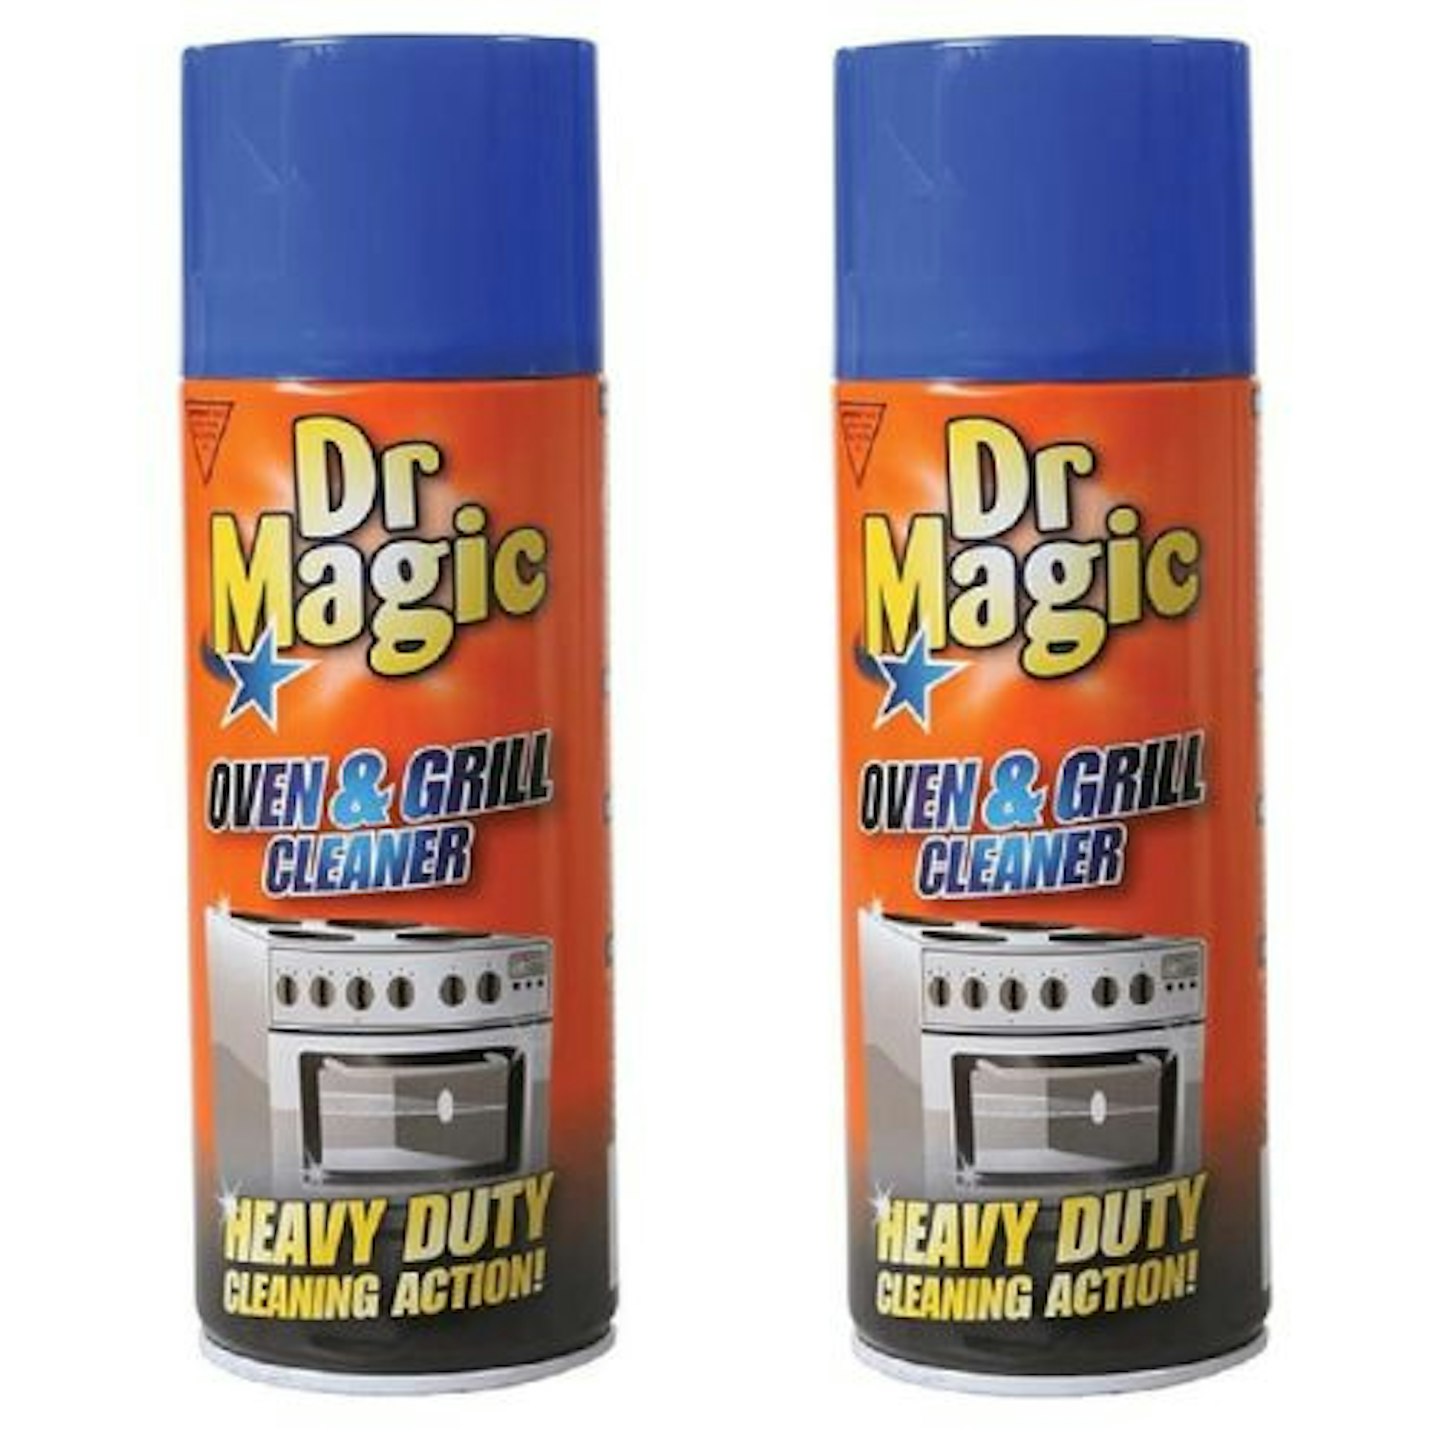 Dr Magic Oven & Grill Cleaner